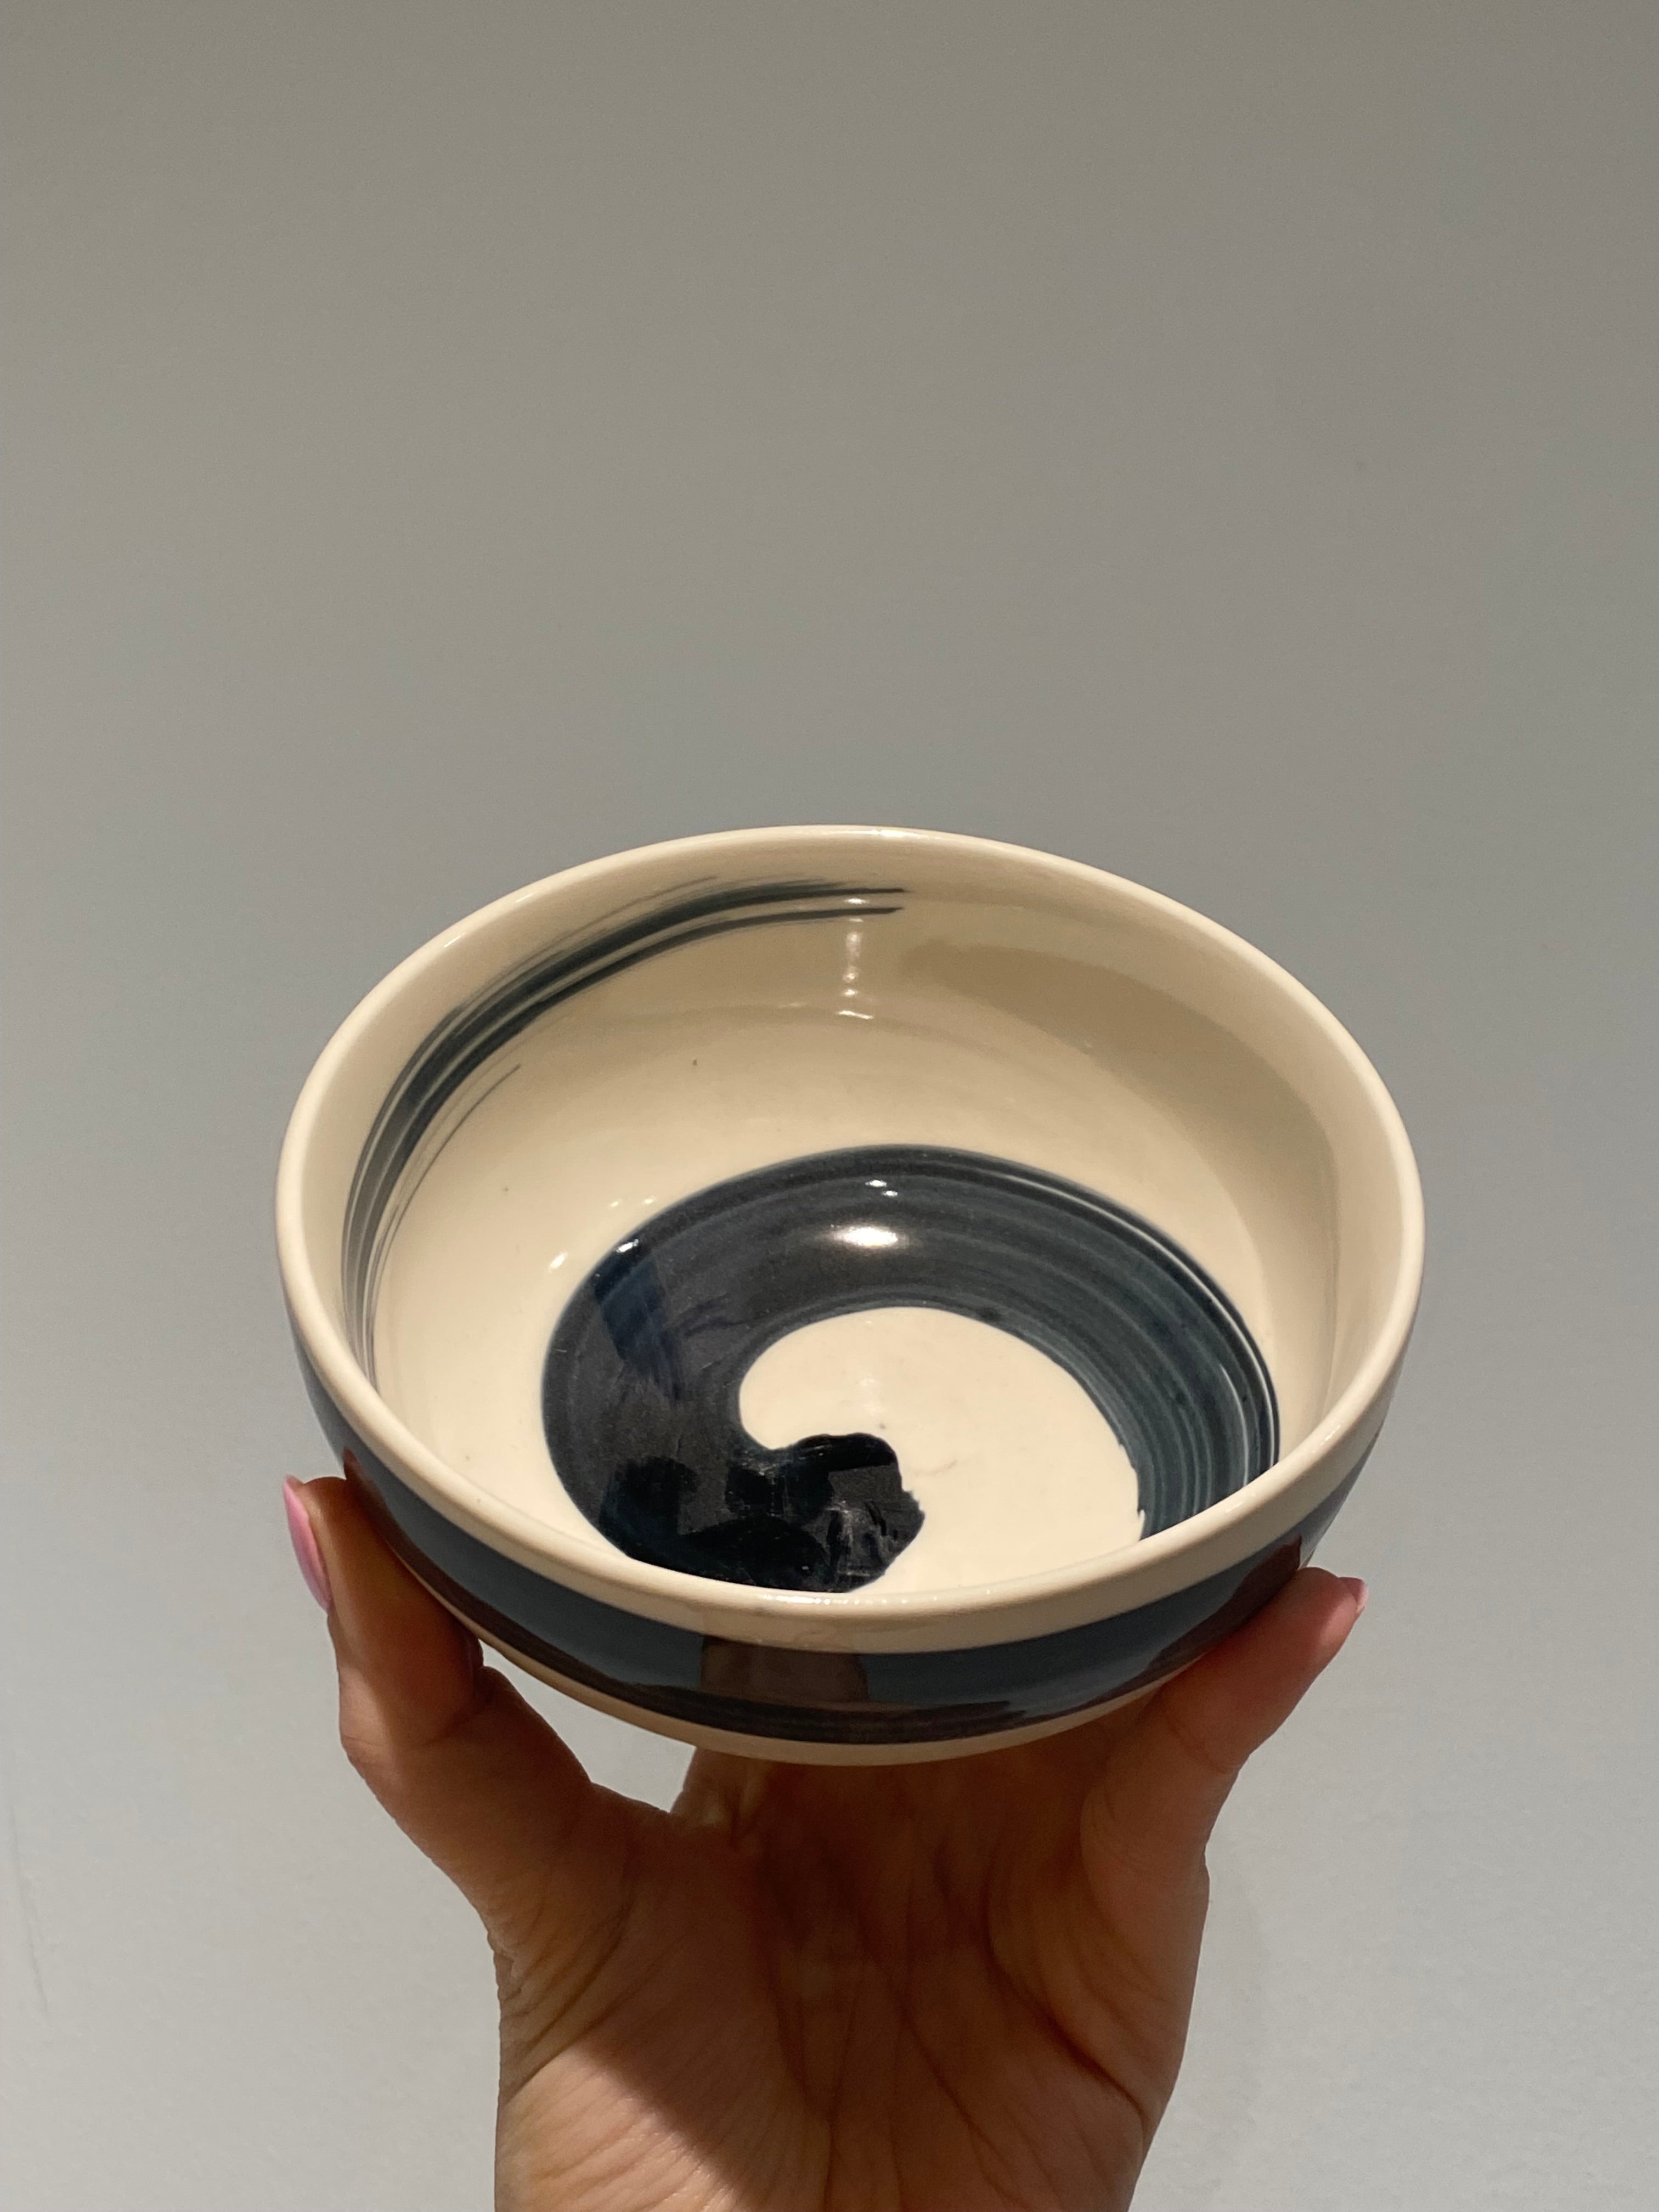 Medium bowl with white glaze and blue spiral pattern